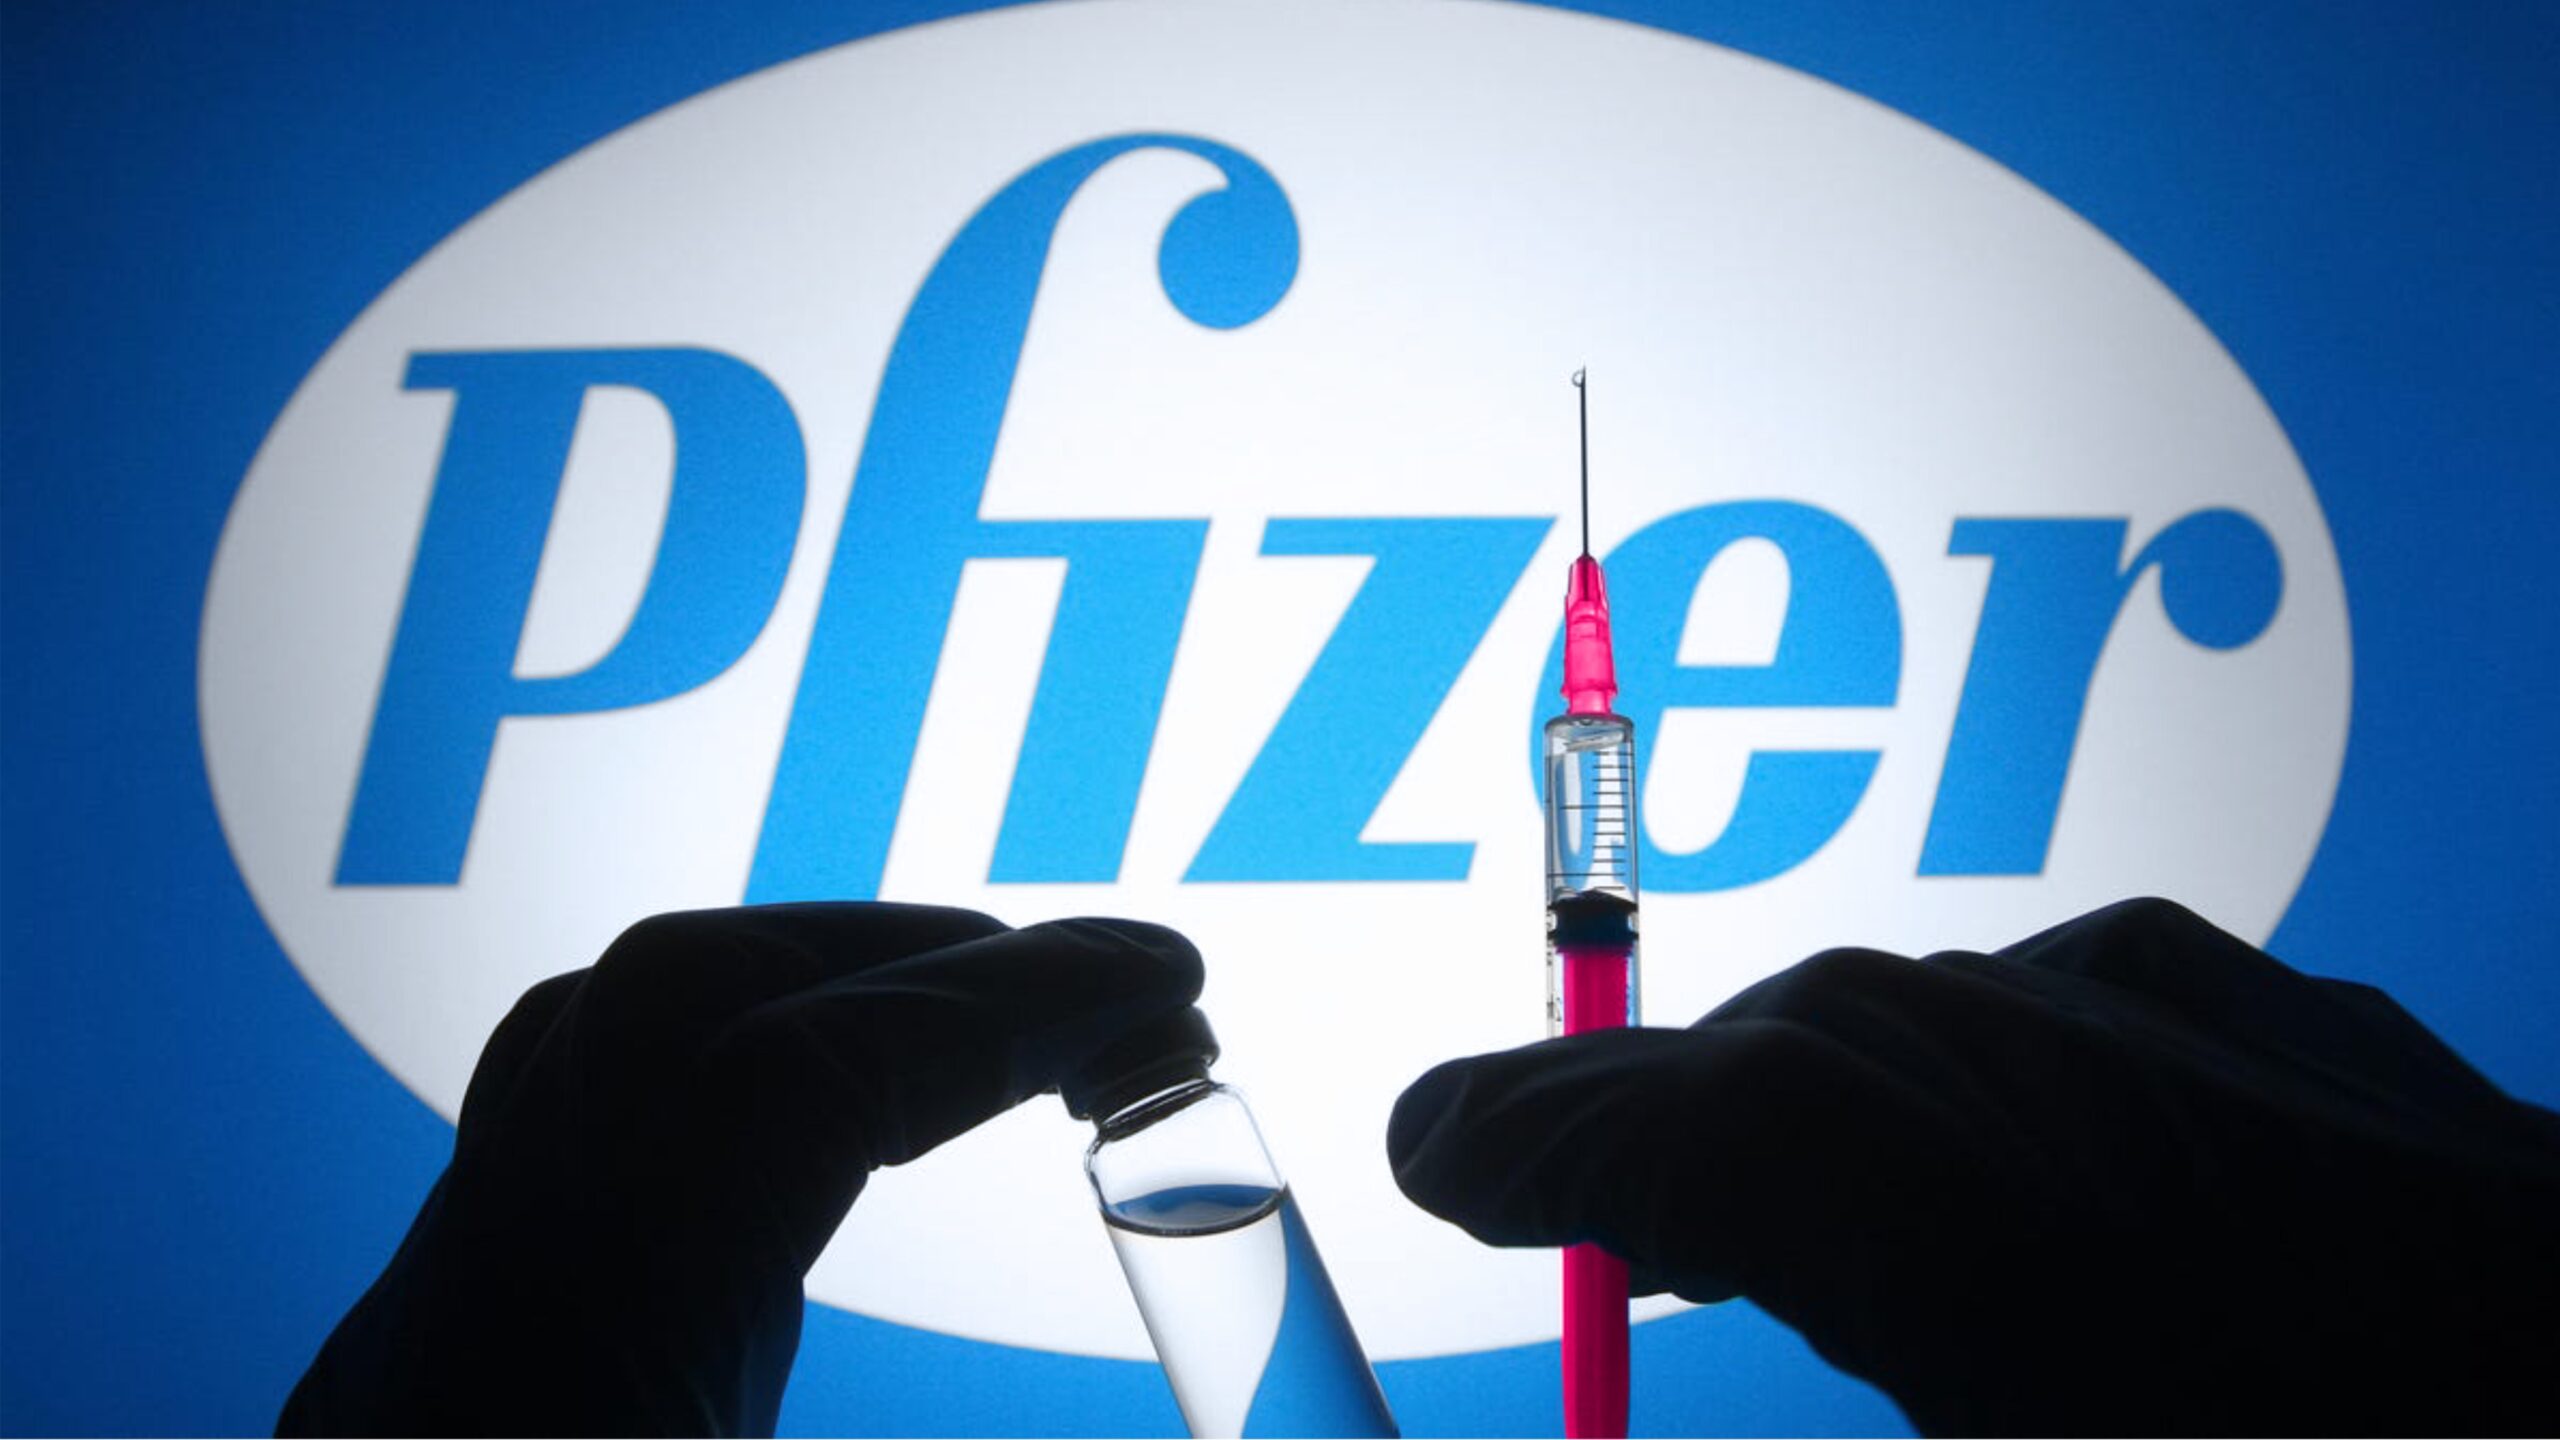 Pfizer Whistleblower Credits ‘The Lord’ With Helping Her Expose COVID Vaccine Cover-Up - Harbingers Daily